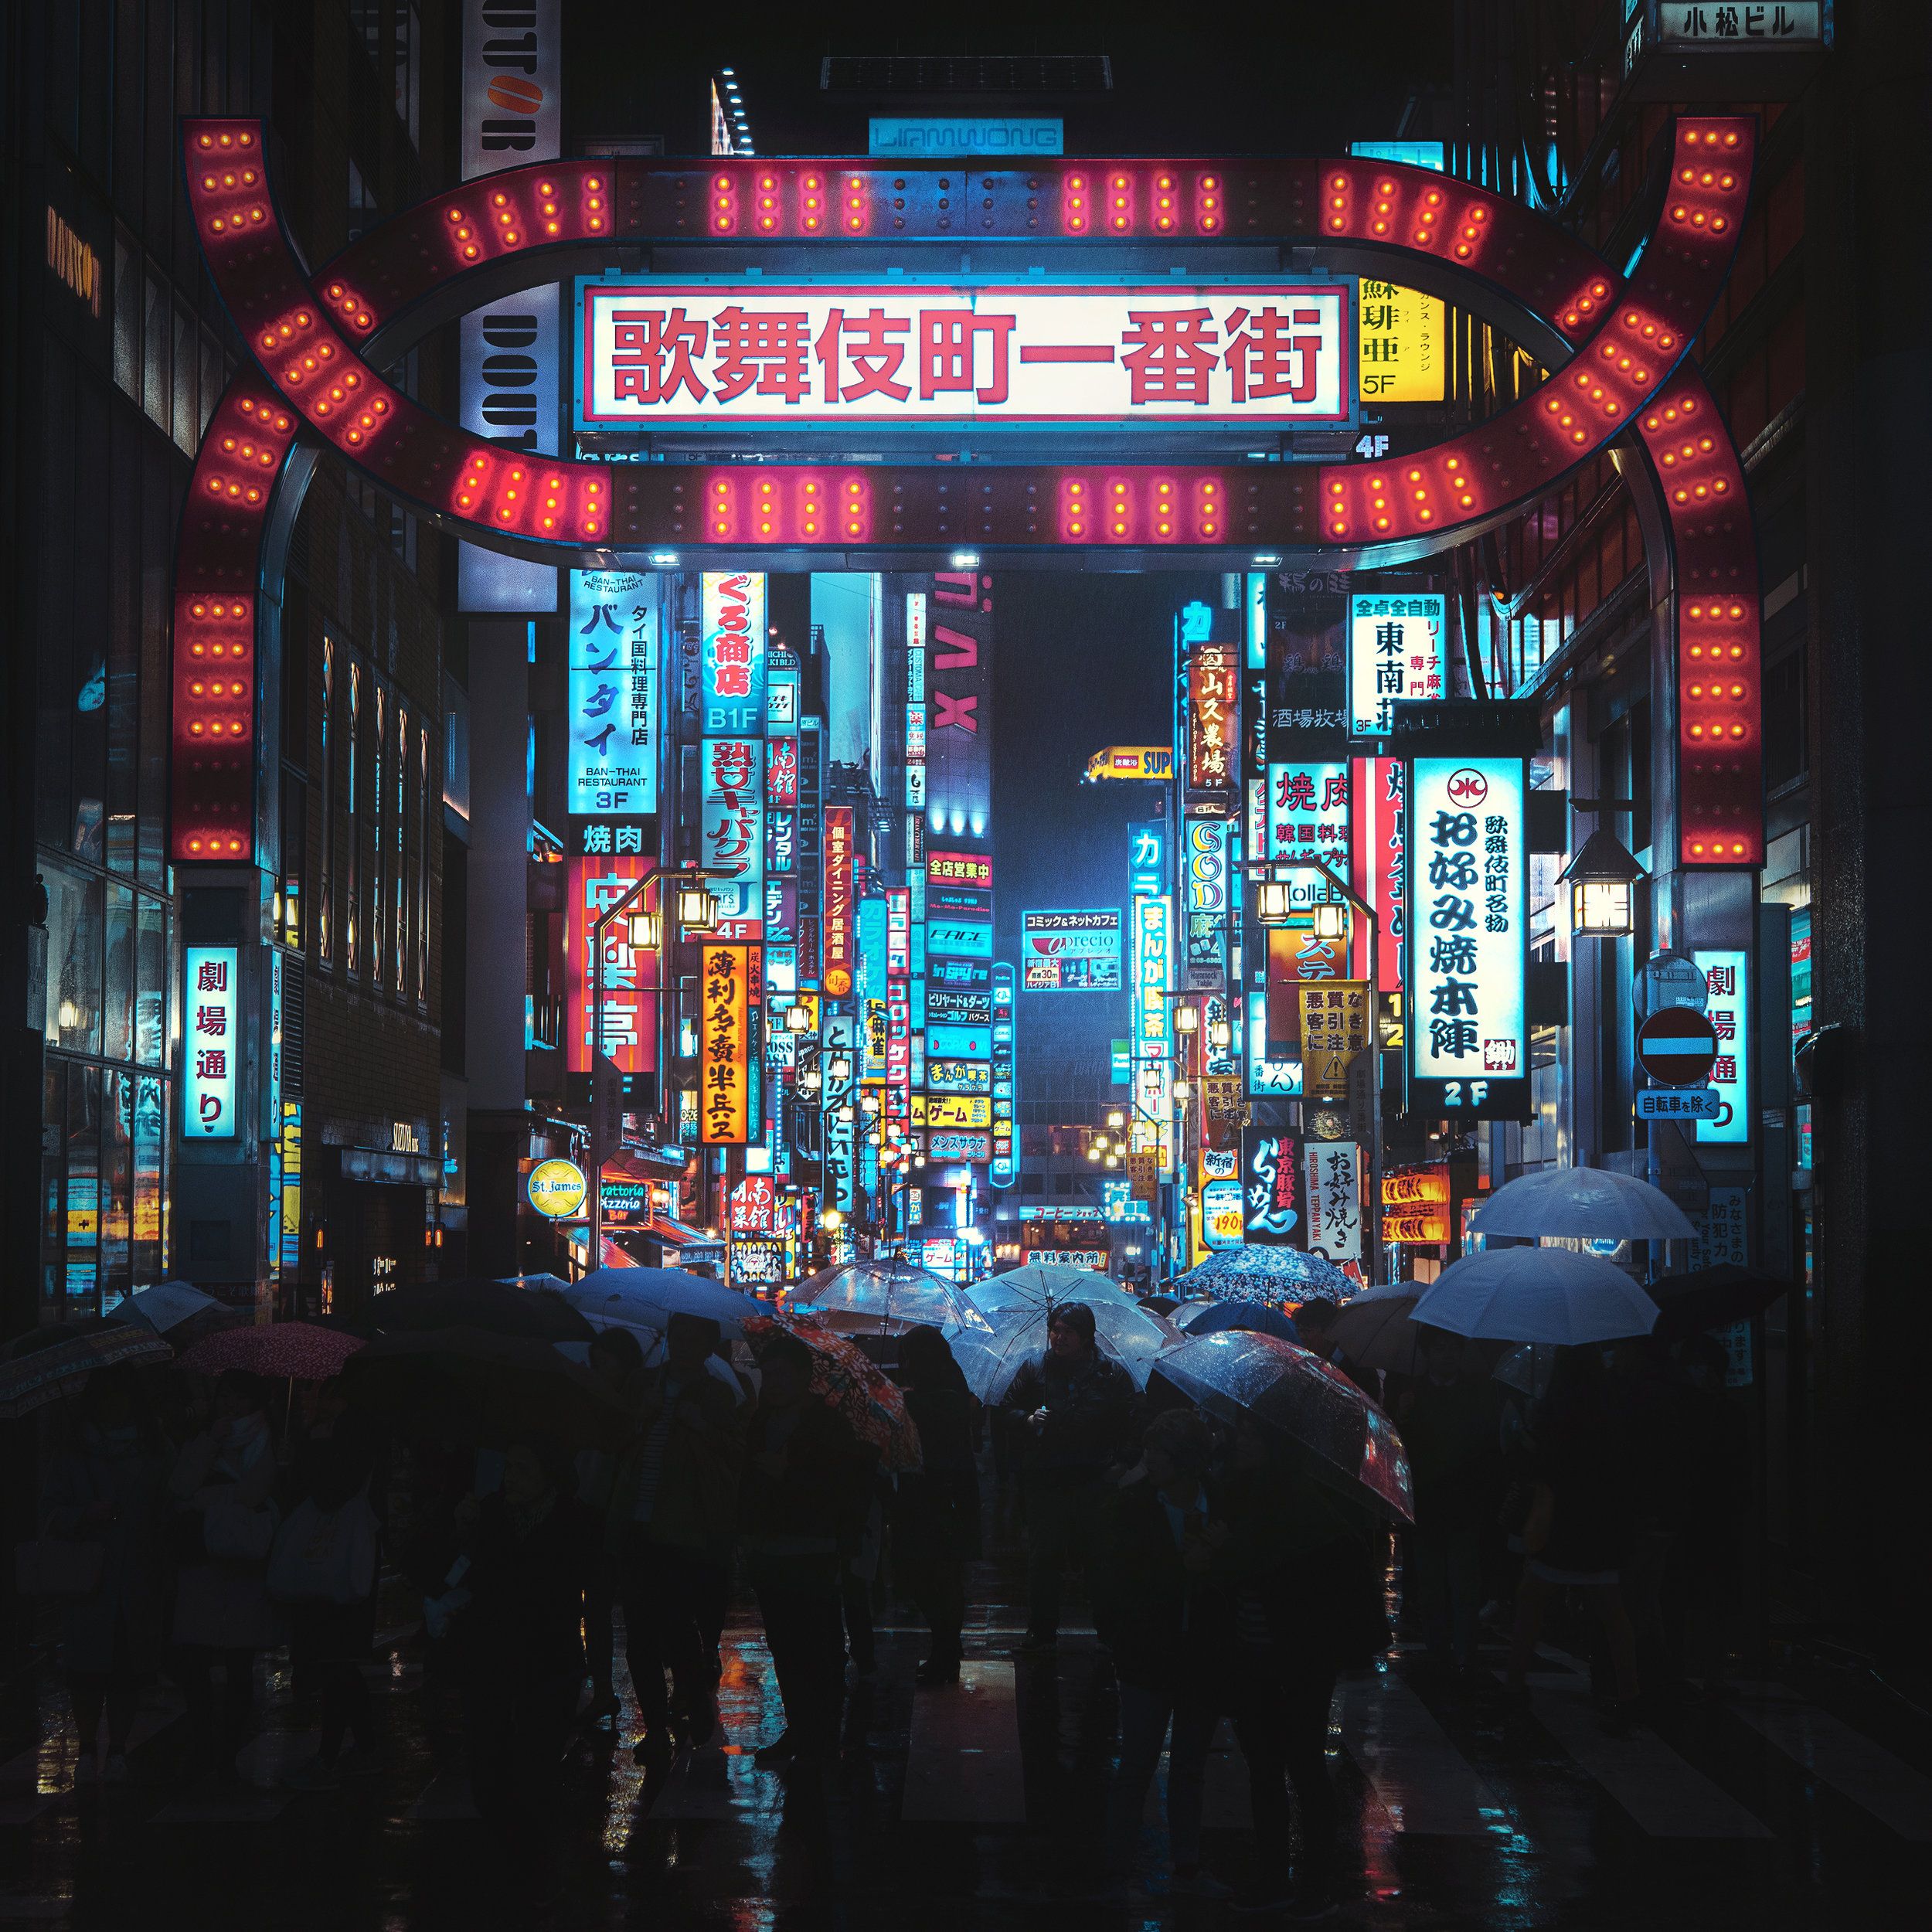 A crowded street at night with people holding umbrellas and neon signs - Tokyo